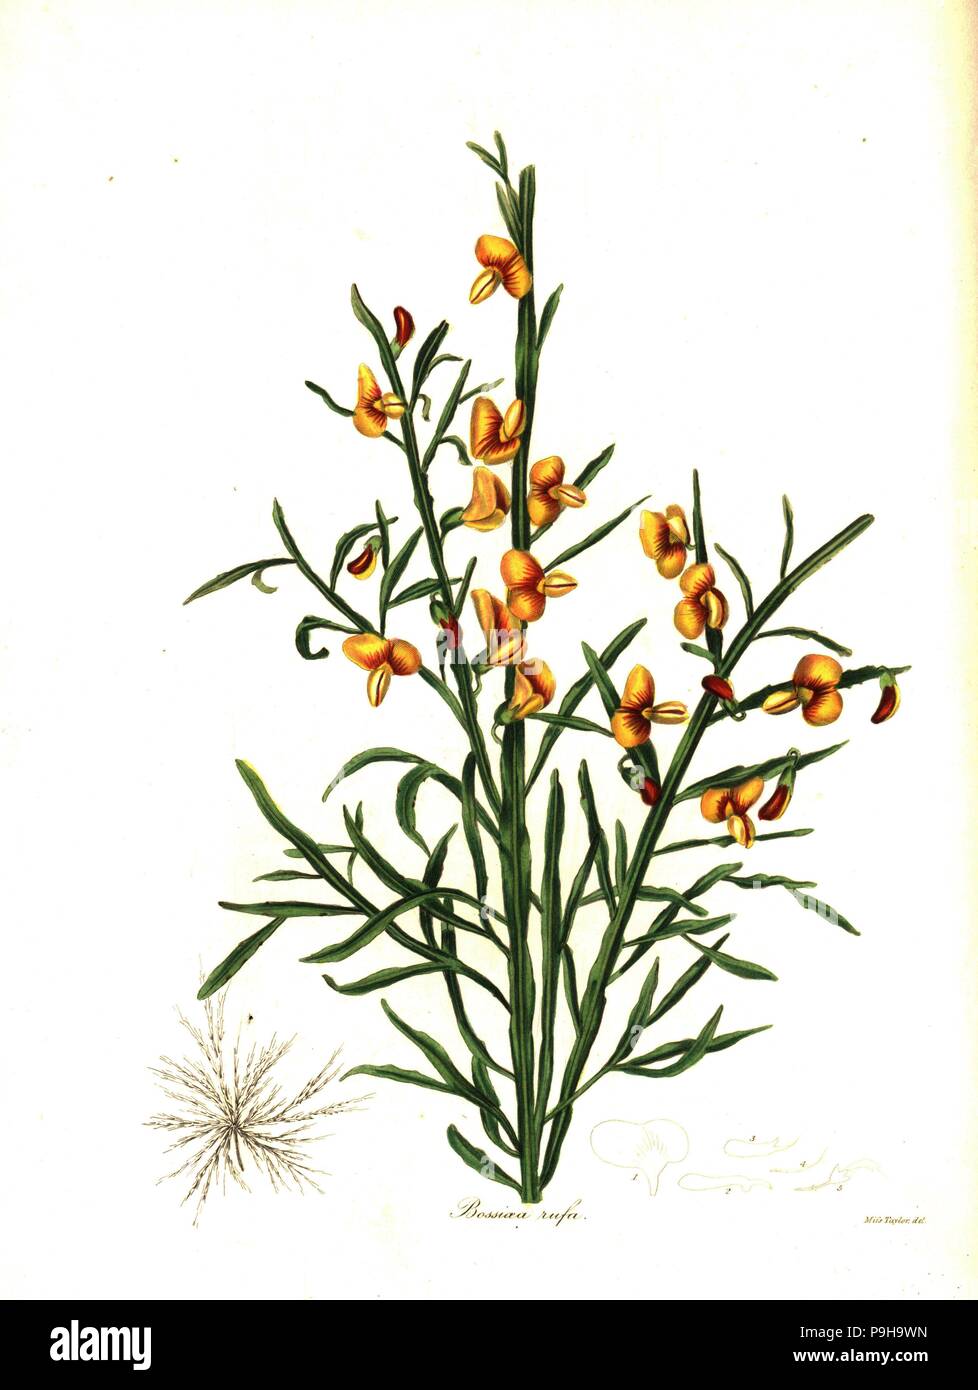 Rufous bossiaea, Bossiaea rufa. Handcoloured copperplate engraving after a botanical illustration by Miss Jane Taylor from Benjamin Maund and the Rev. John Stevens Henslow's The Botanist, London, 1836. Stock Photo